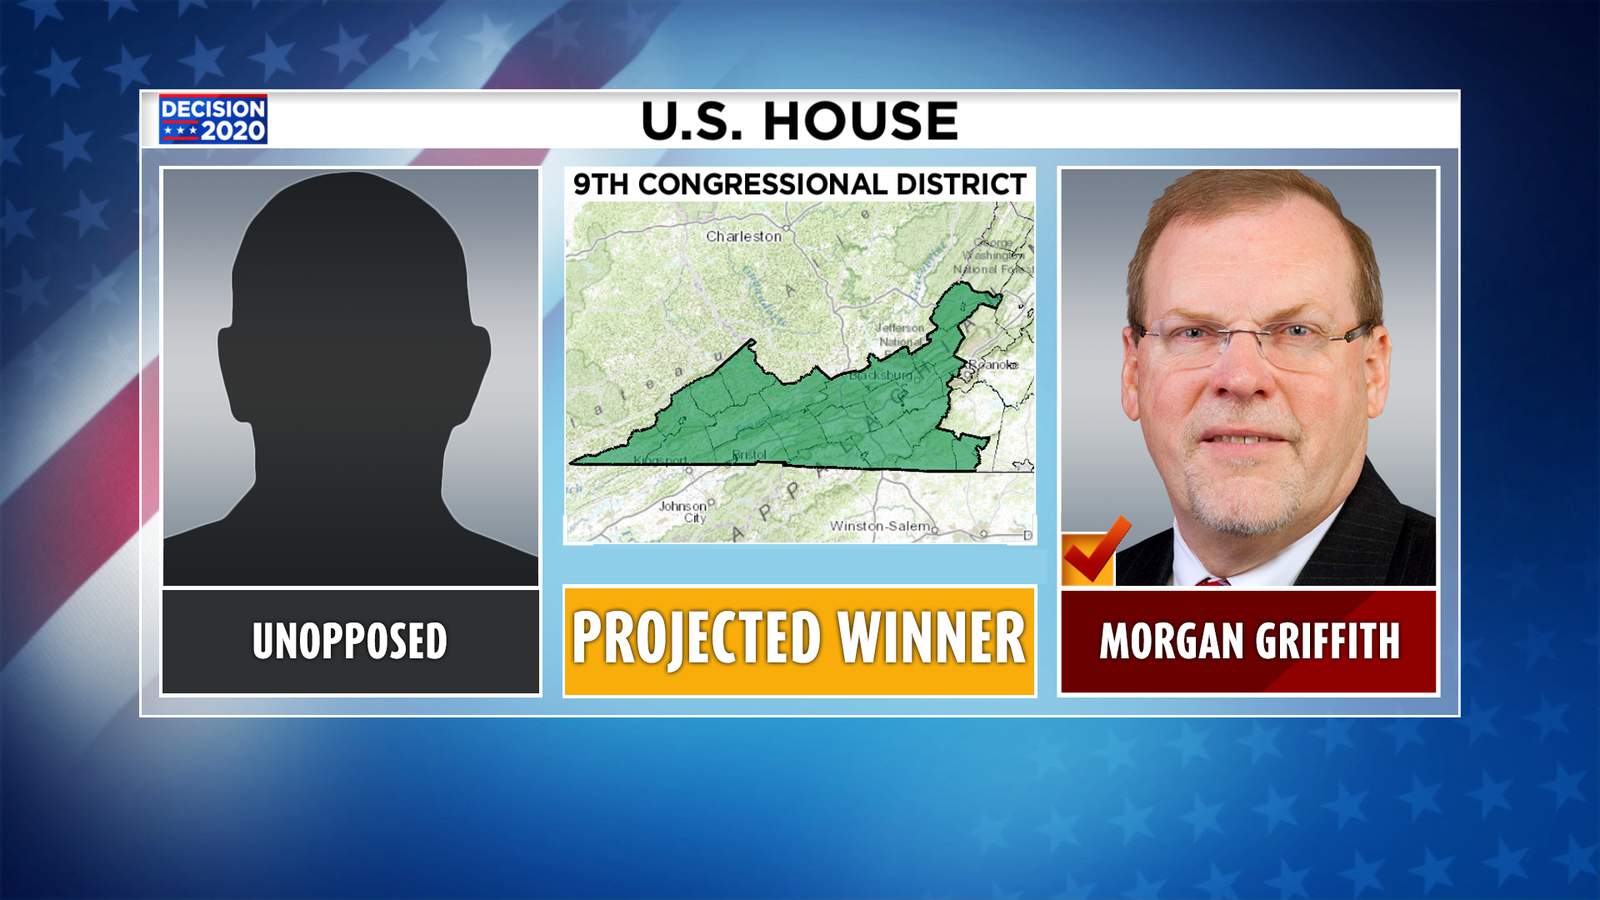 Morgan Griffith, running unopposed, wins reelection in Virginia’s 9th Congressional District